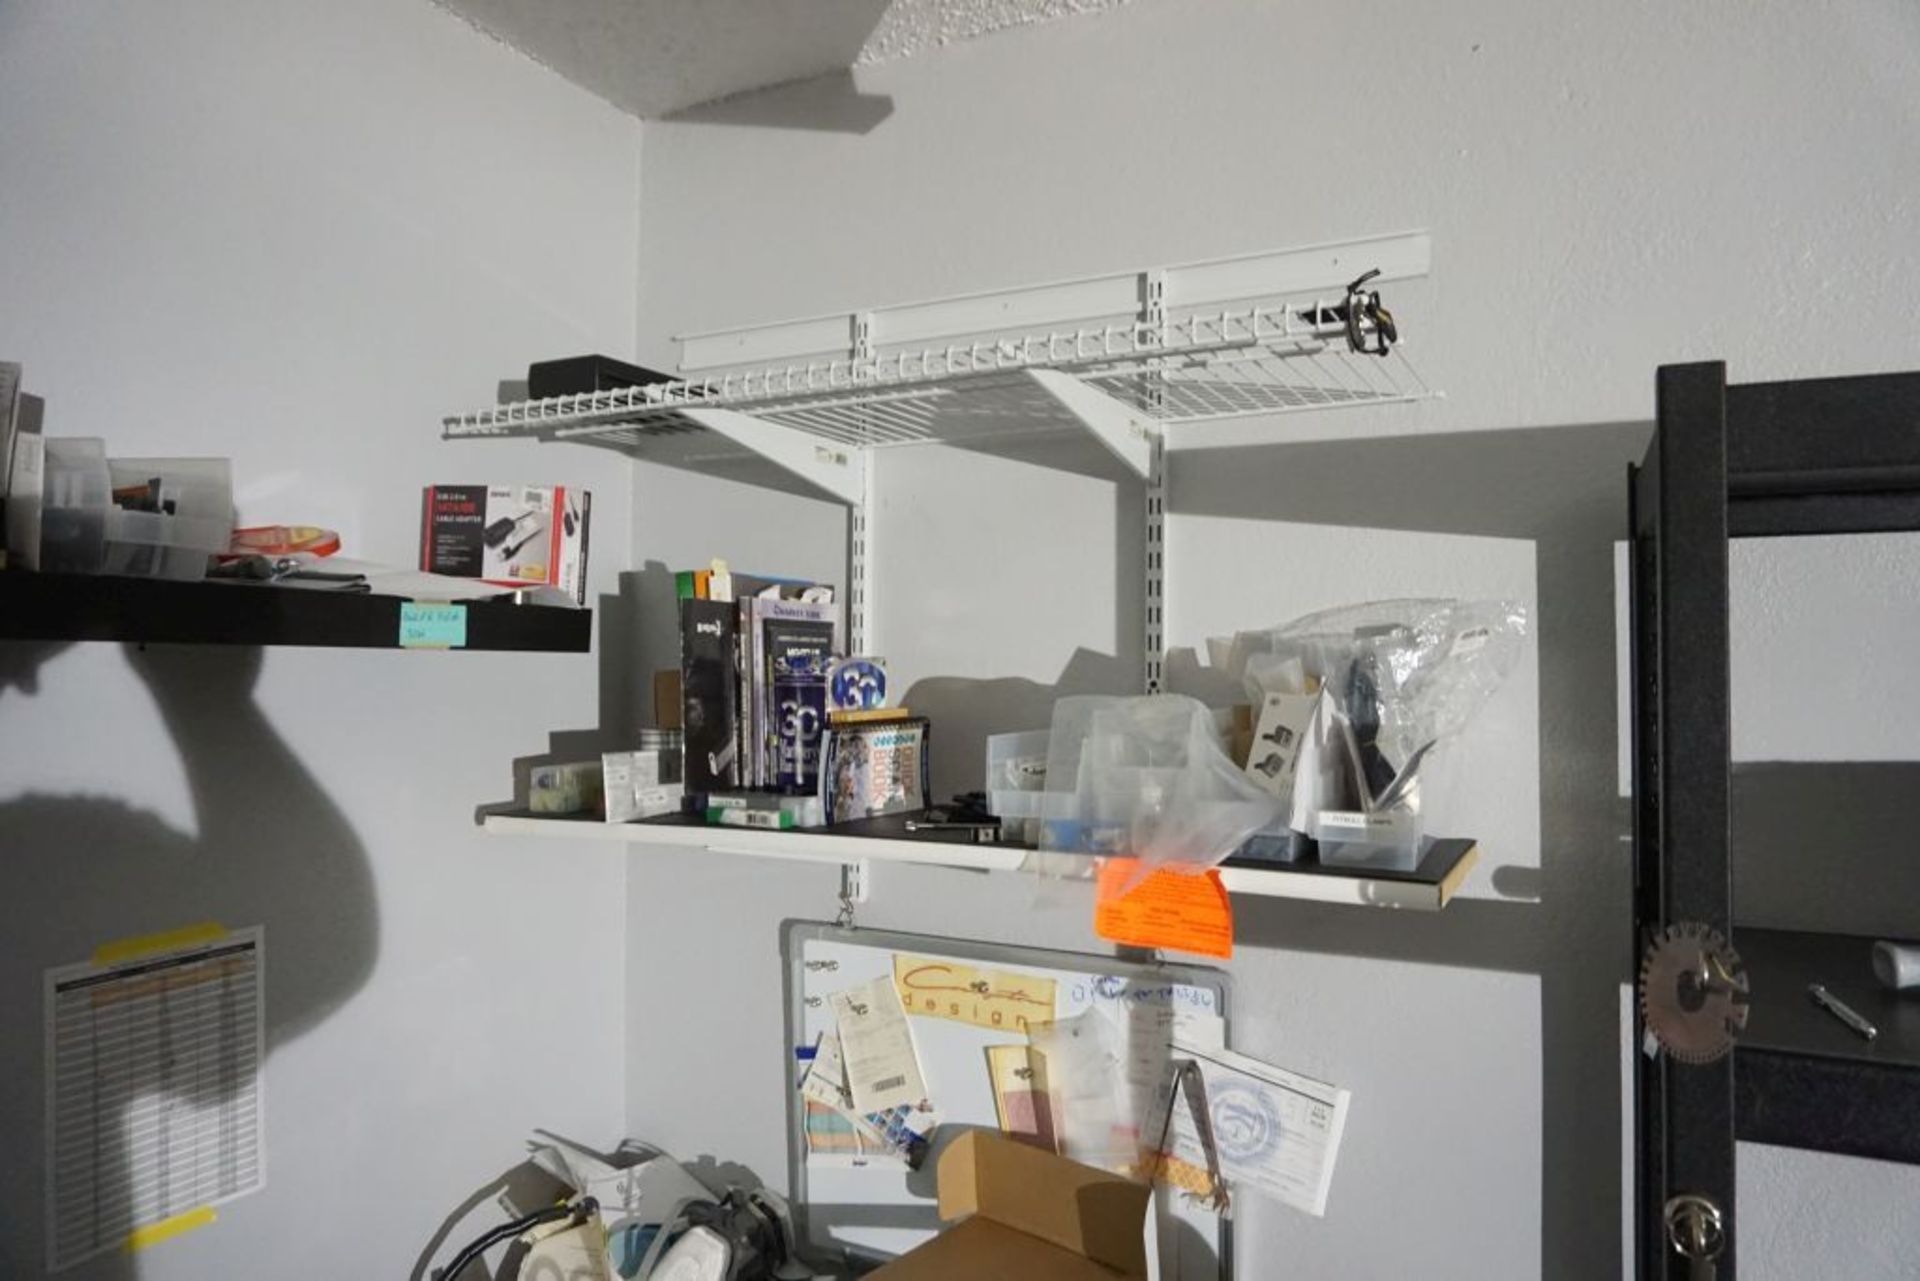 Lot of Room Contents|Includes: Workbench, Routers, Cabinets, Tripod, Office Supplies; Tag: 221190 - Image 8 of 16